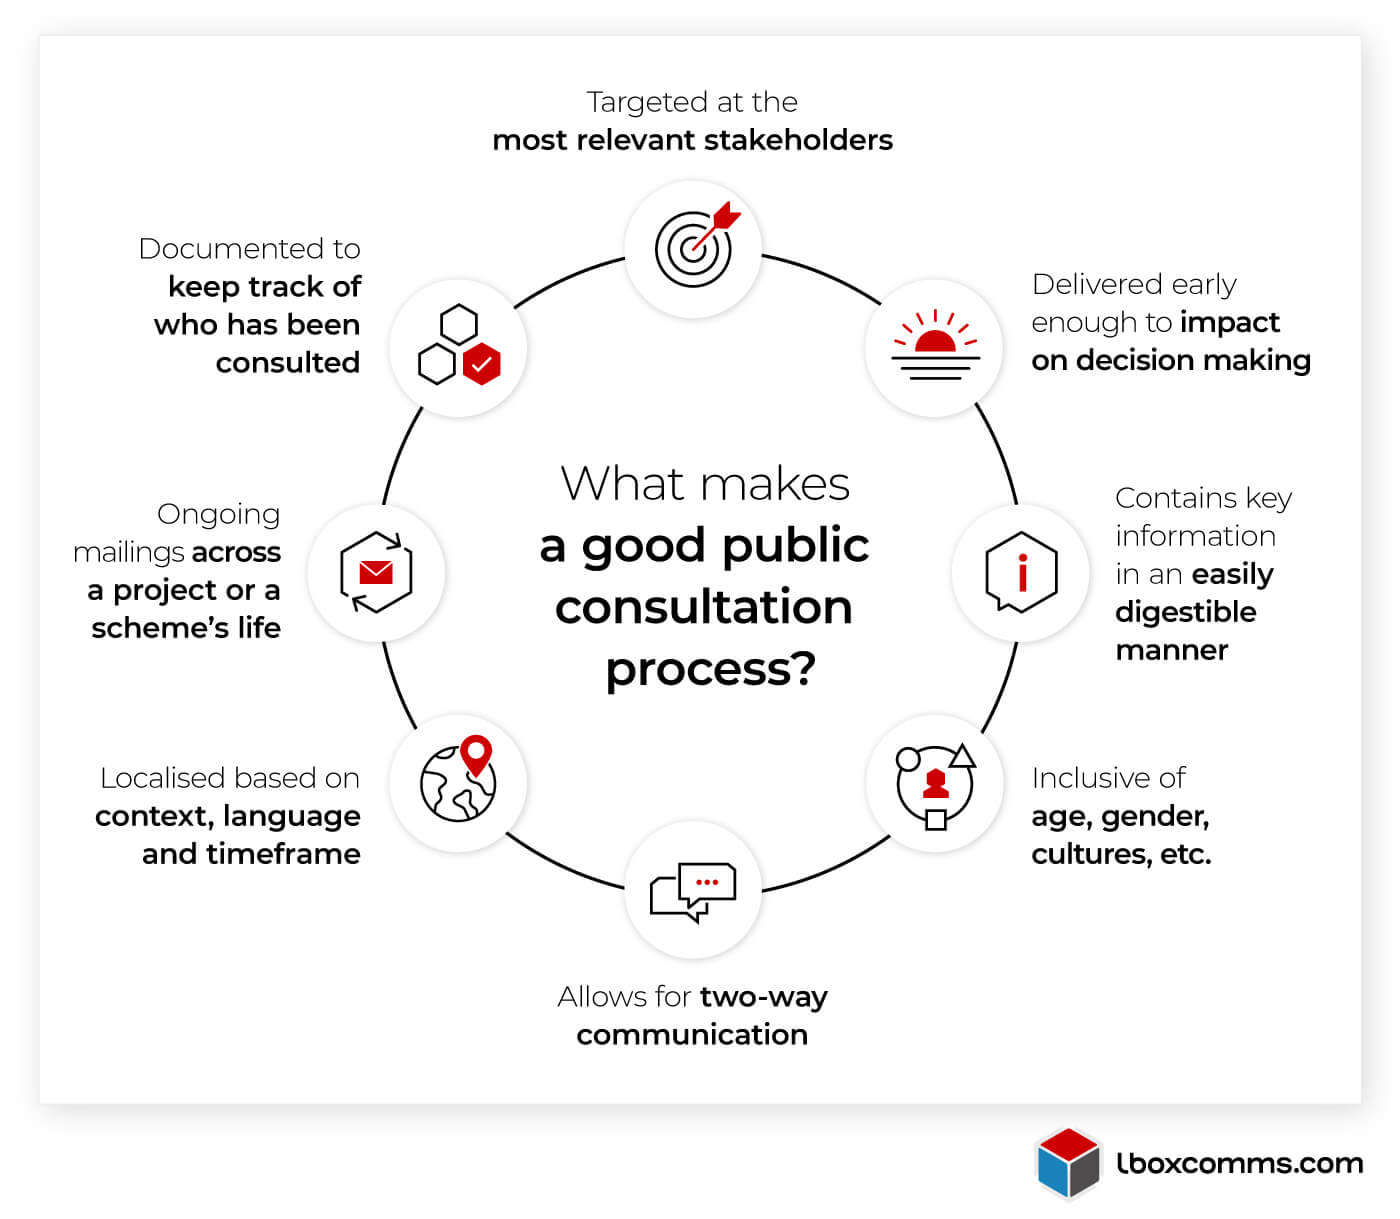 Infographic: What makes a good public consultation process?